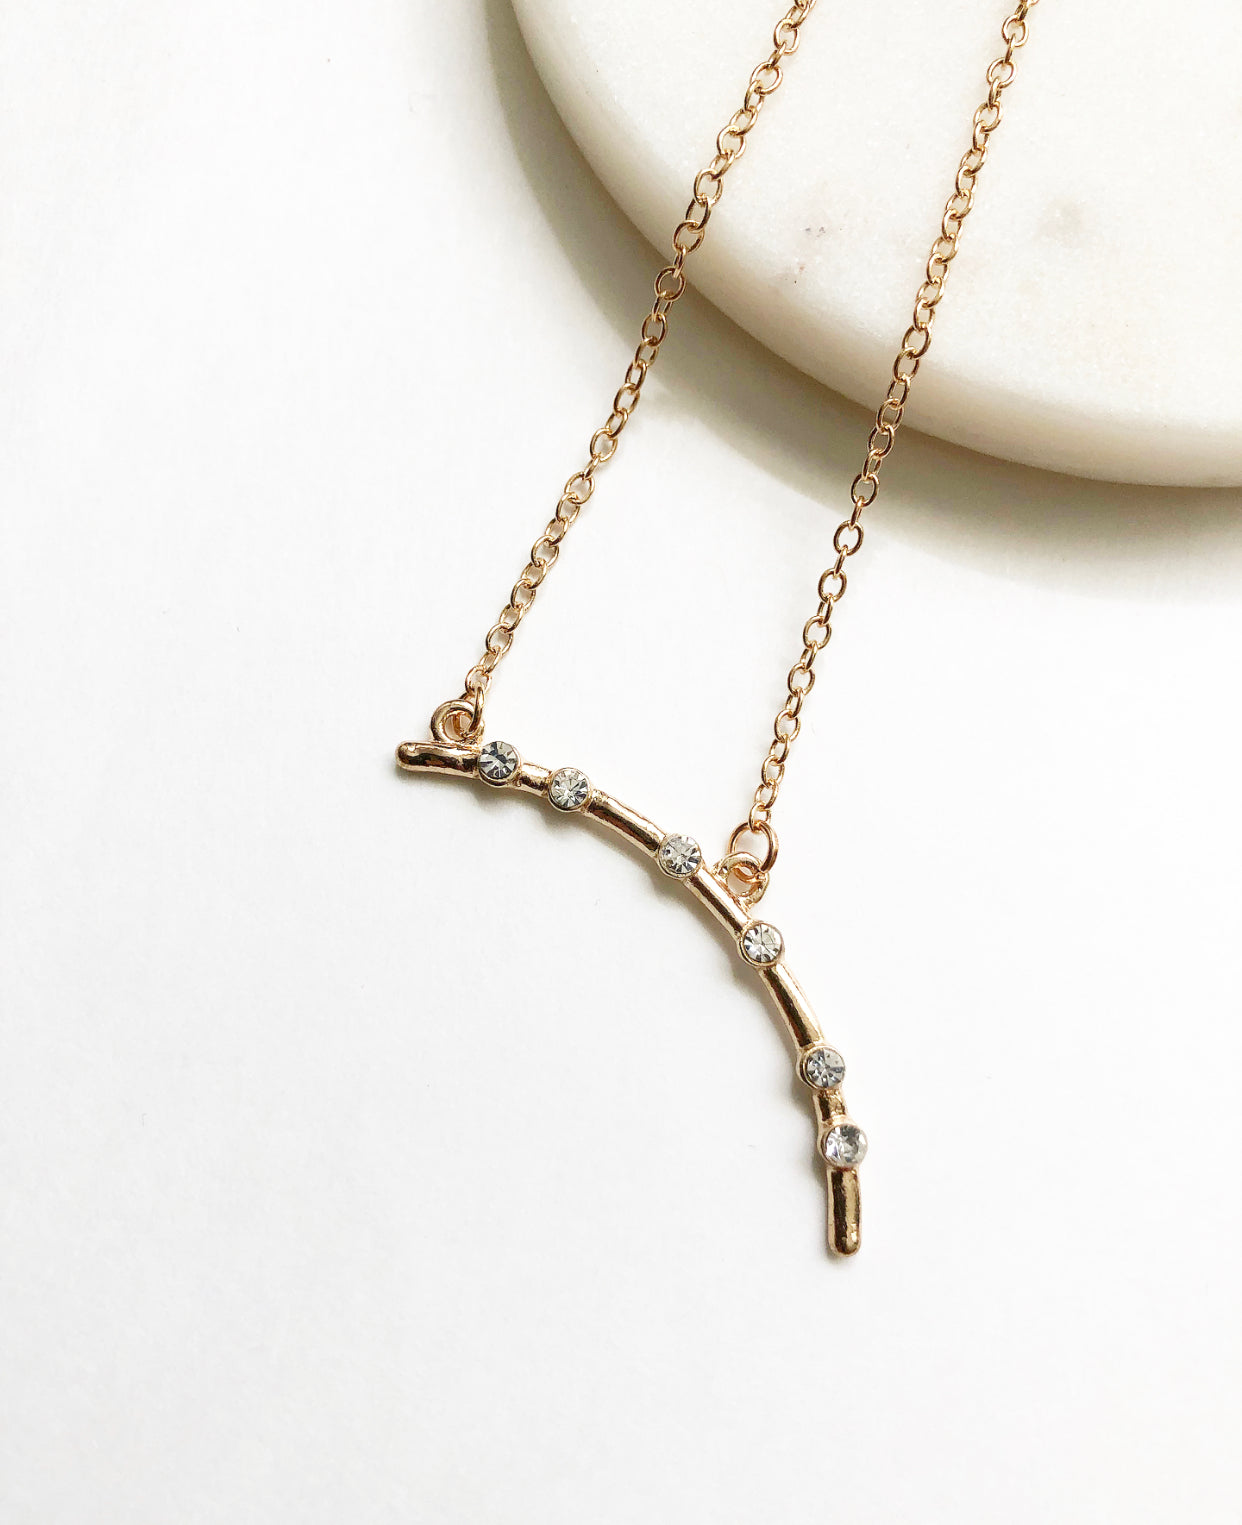 The Other Side Necklace